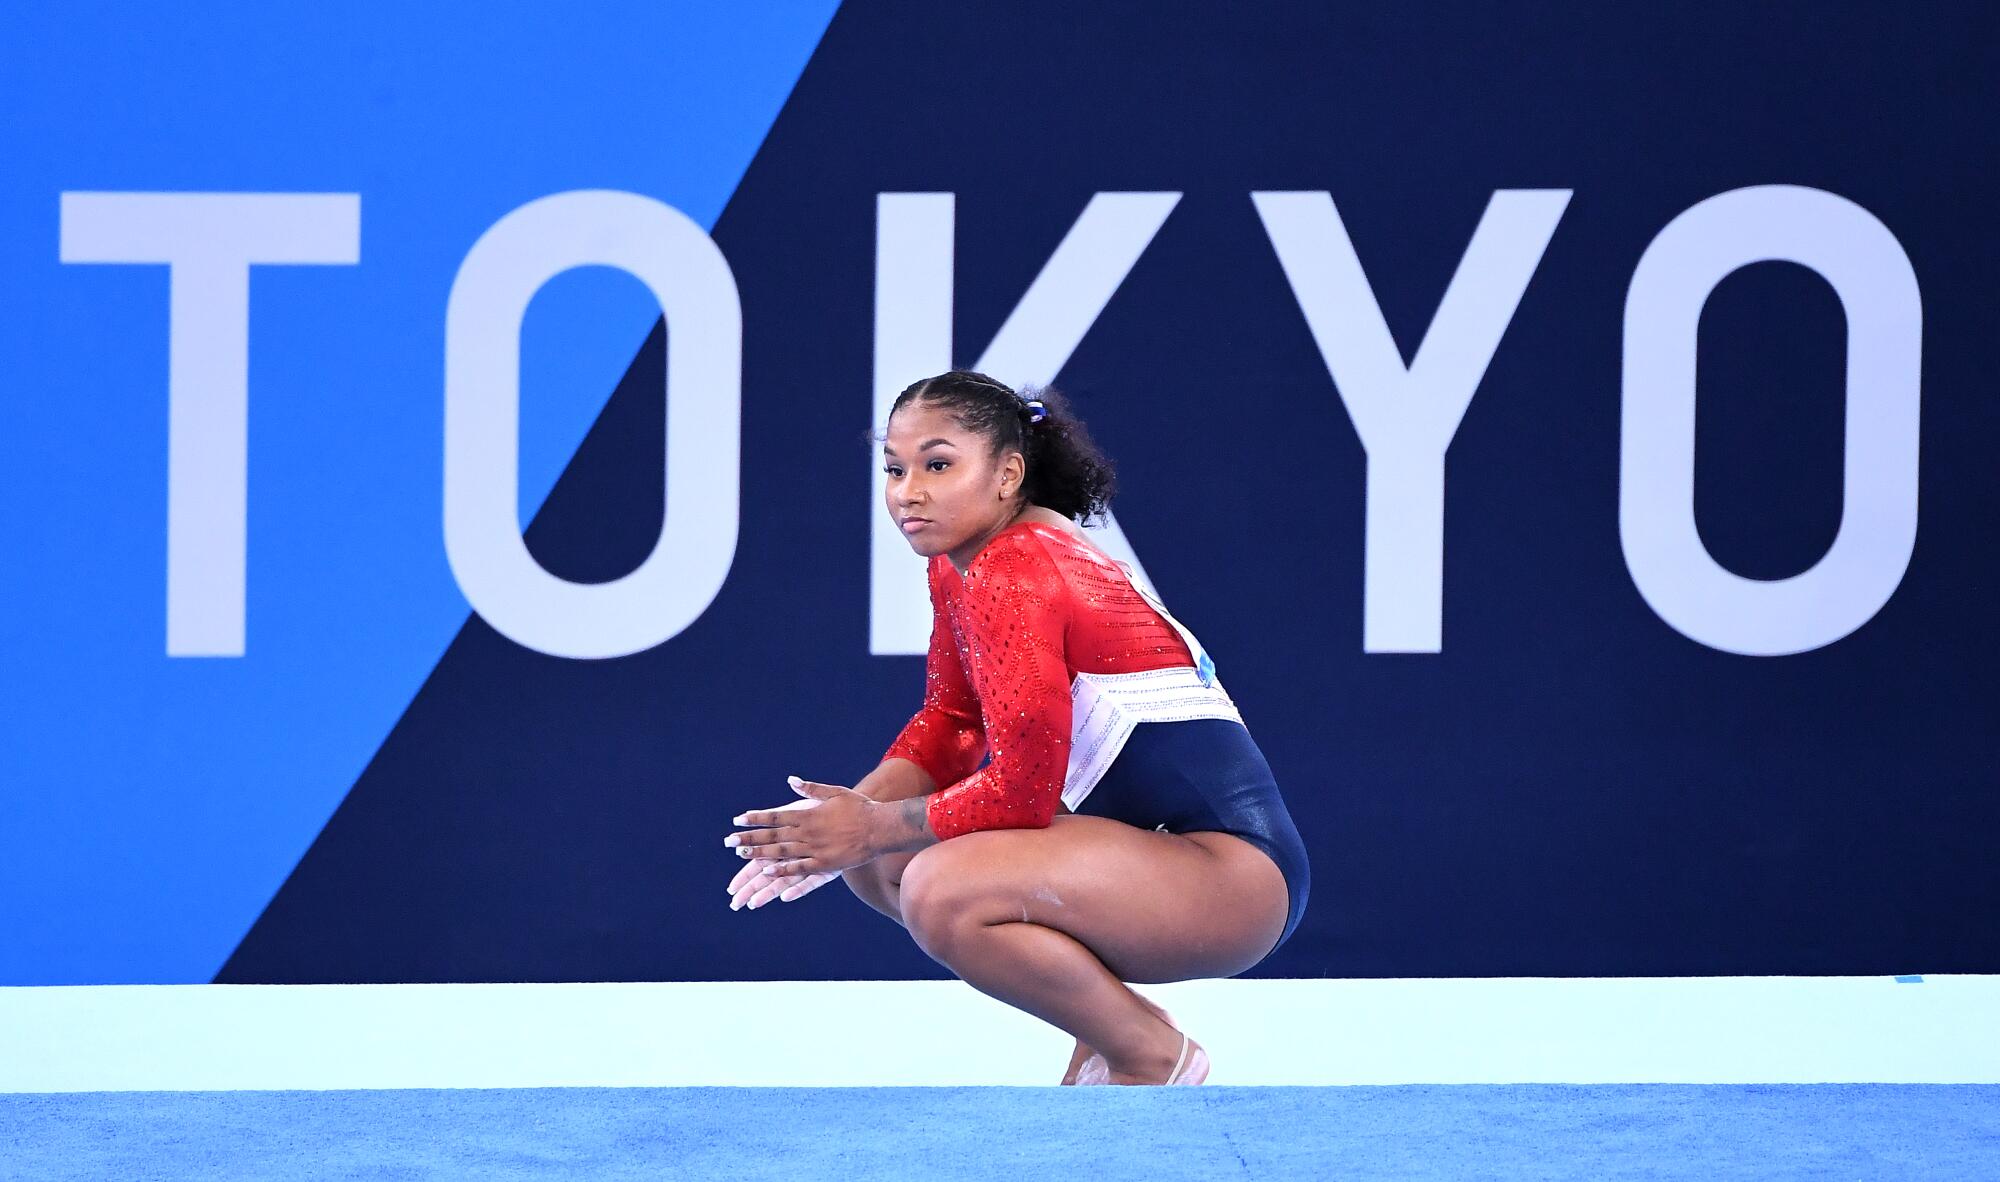 U.S. gymnast Jordan Chiles waits to compete in the floor exercise in the women's team final.